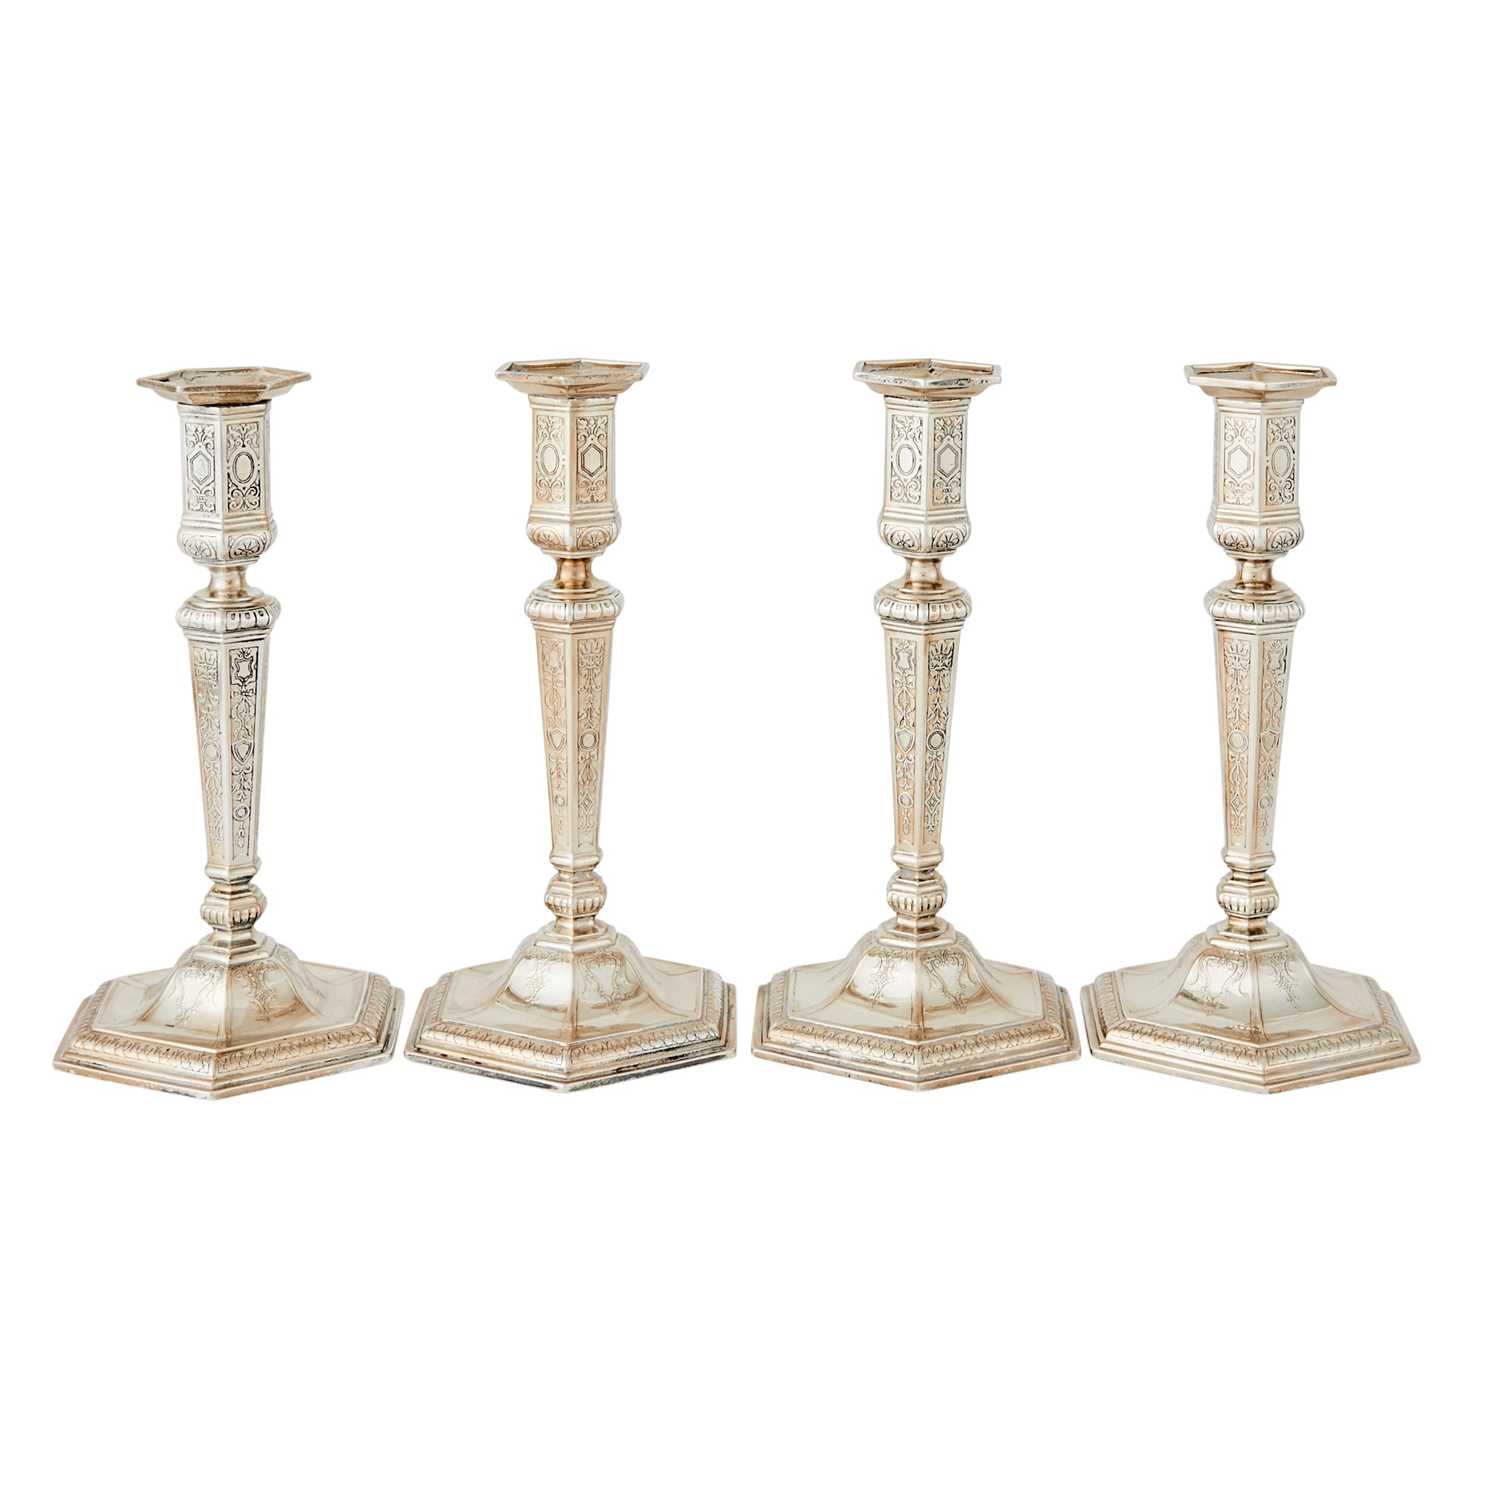 Lot 173 - Set of Four Tiffany & Co. Regence Style Sterling Silver Candlesticks